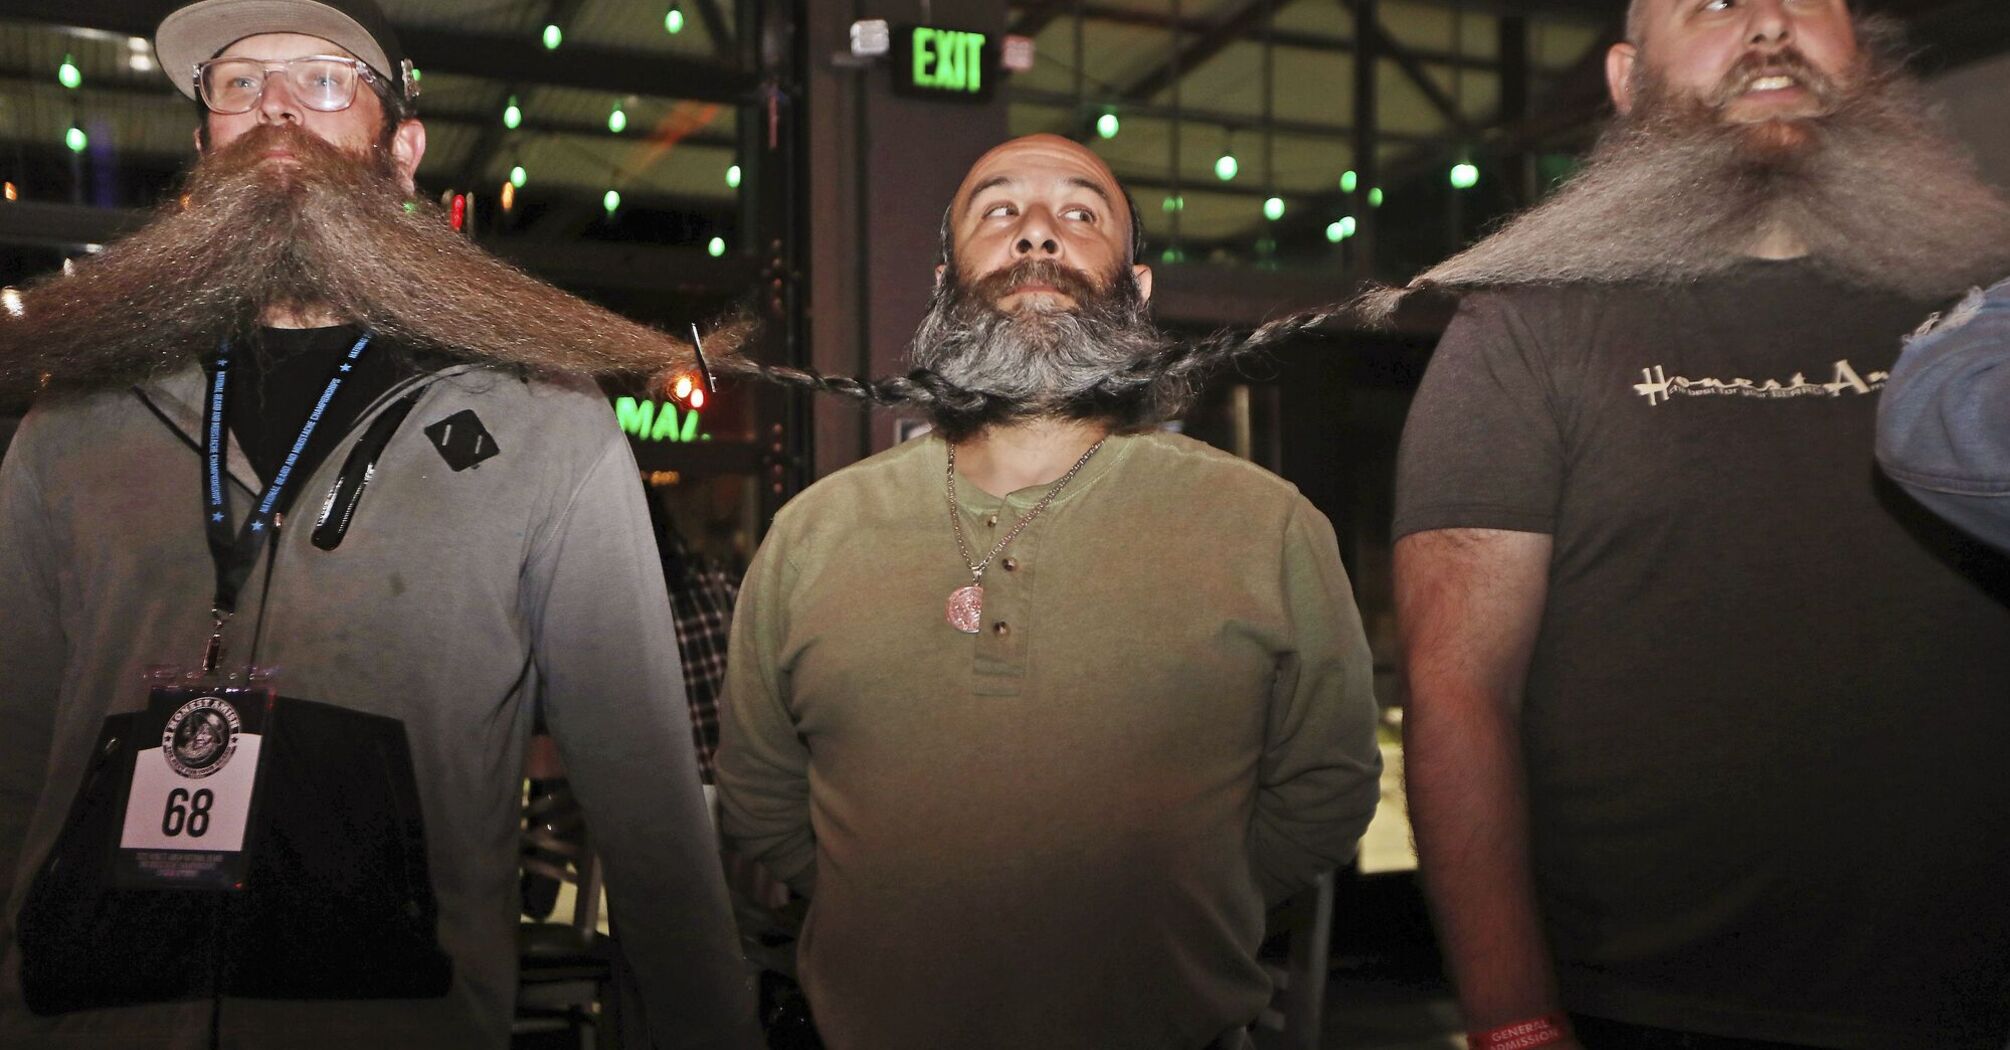 89 men created a chain of beards